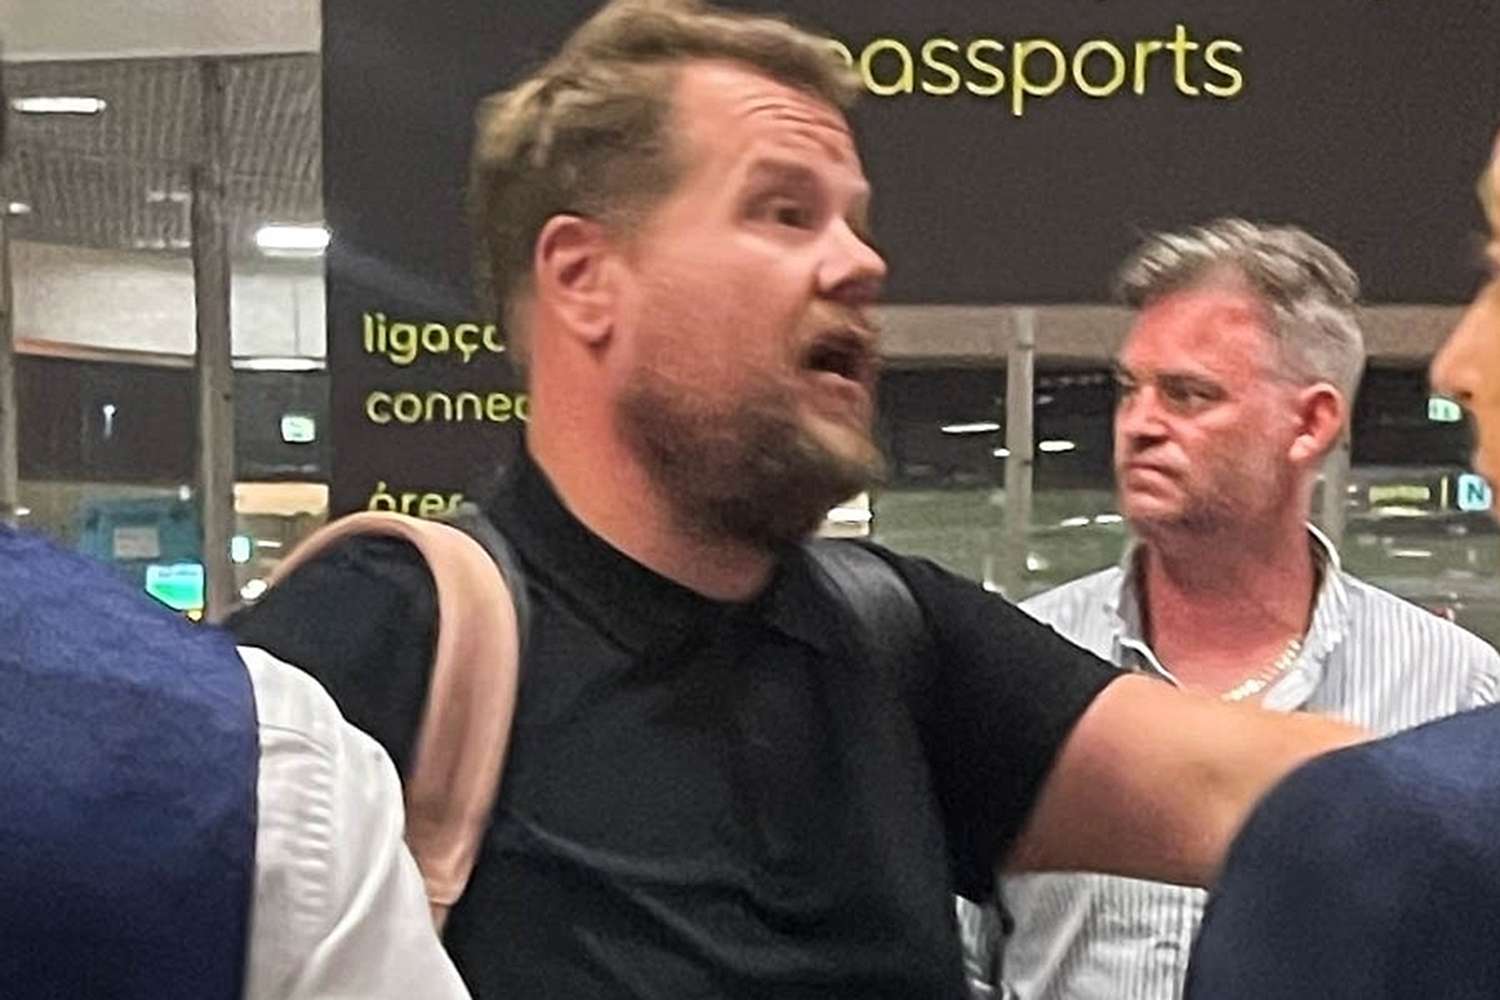 James Corden Pictured Engaging Crew After Scary Plane Emergency, But Fellow Passengers Are Praising His Tact